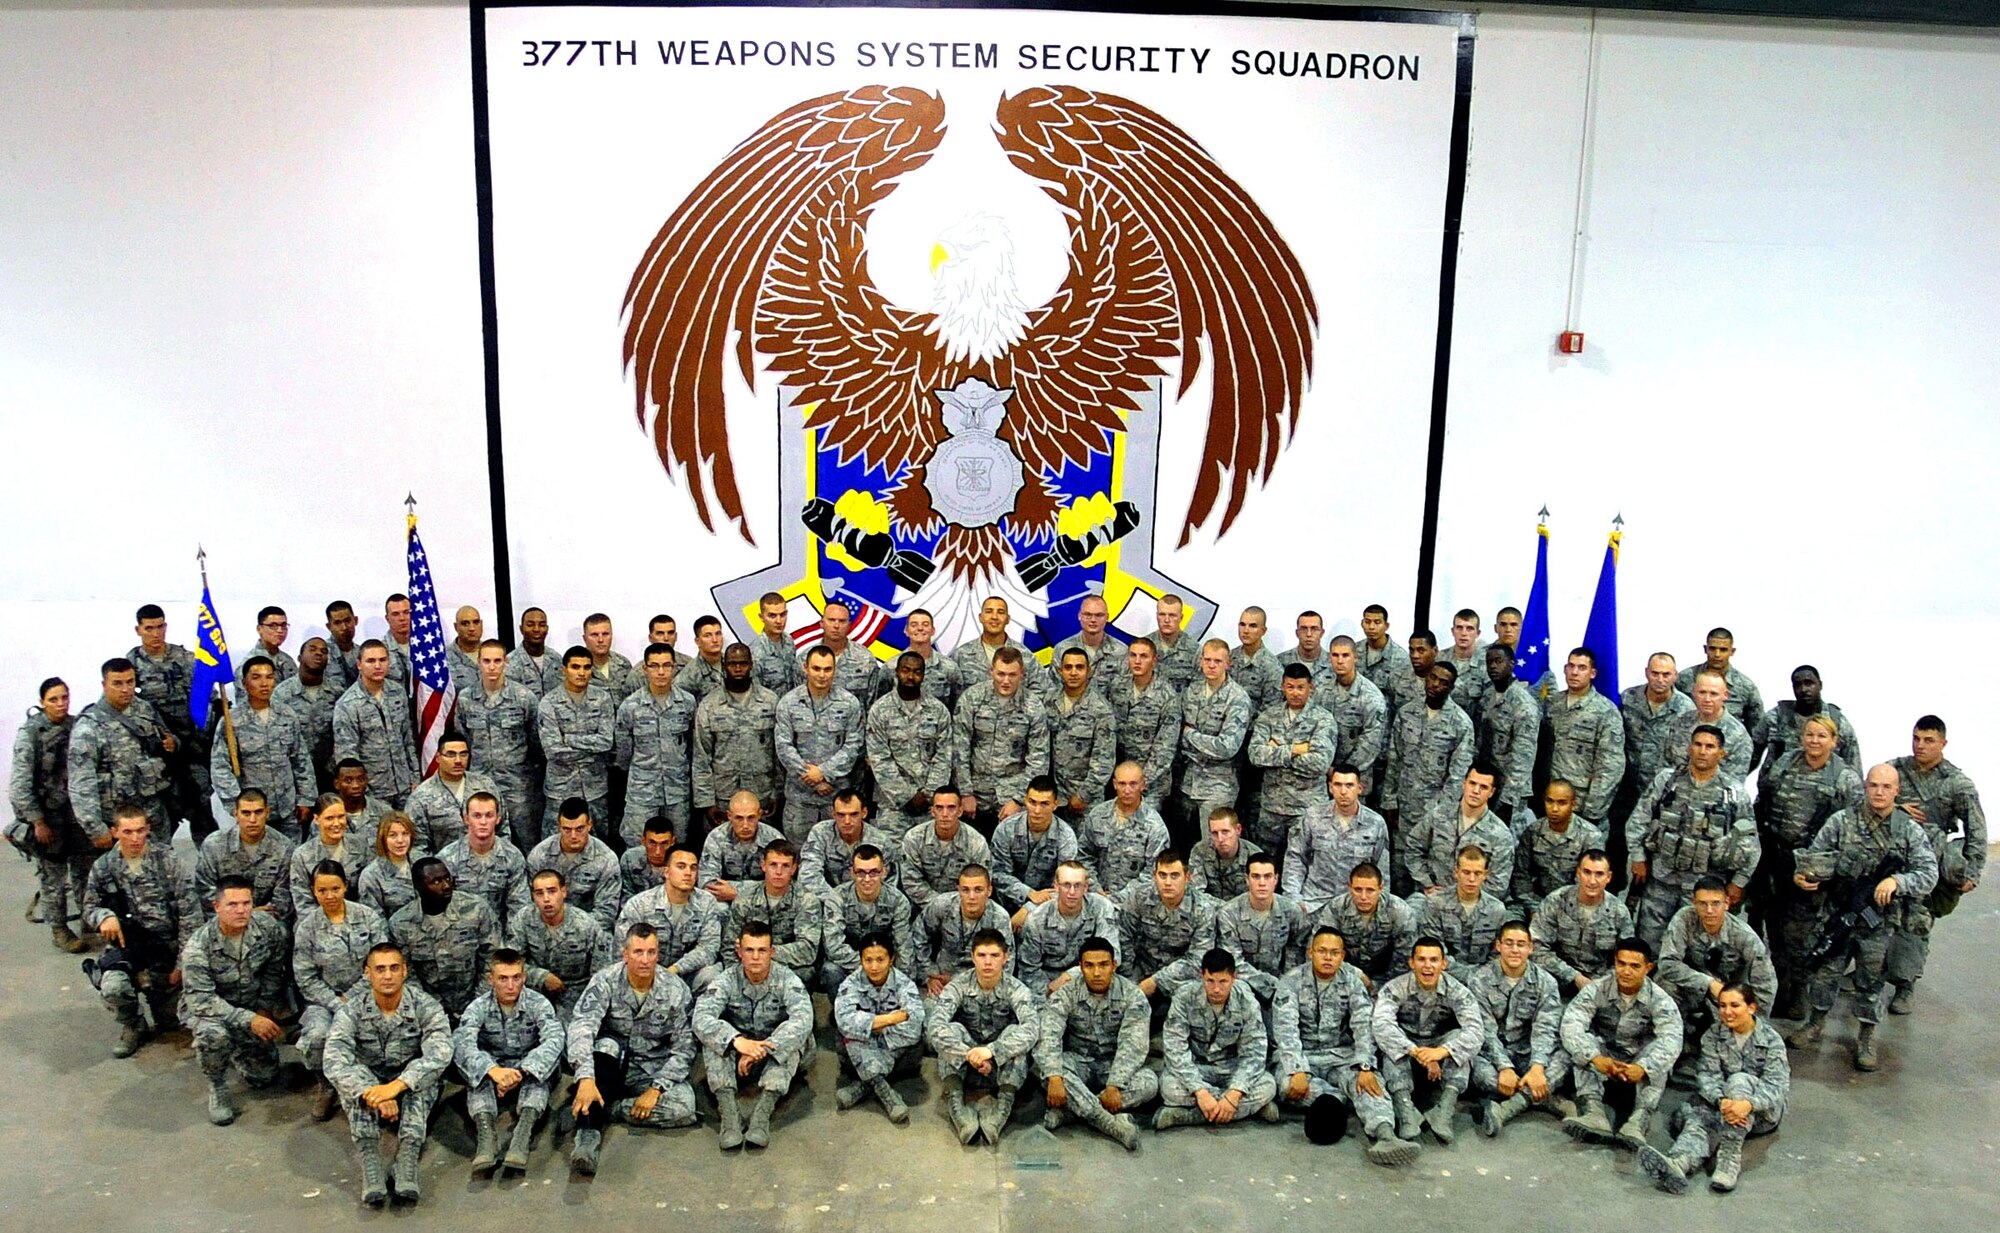 KIRTLAND AFB, N.M. -- The 377th Weapons Systems Squadron was presented the 2011 Air Force Materiel Command “Best Large Security Forces Unit” award Aug. 22. The squadron recently revealed its new unit logo. (Photo by Todd Berenger)